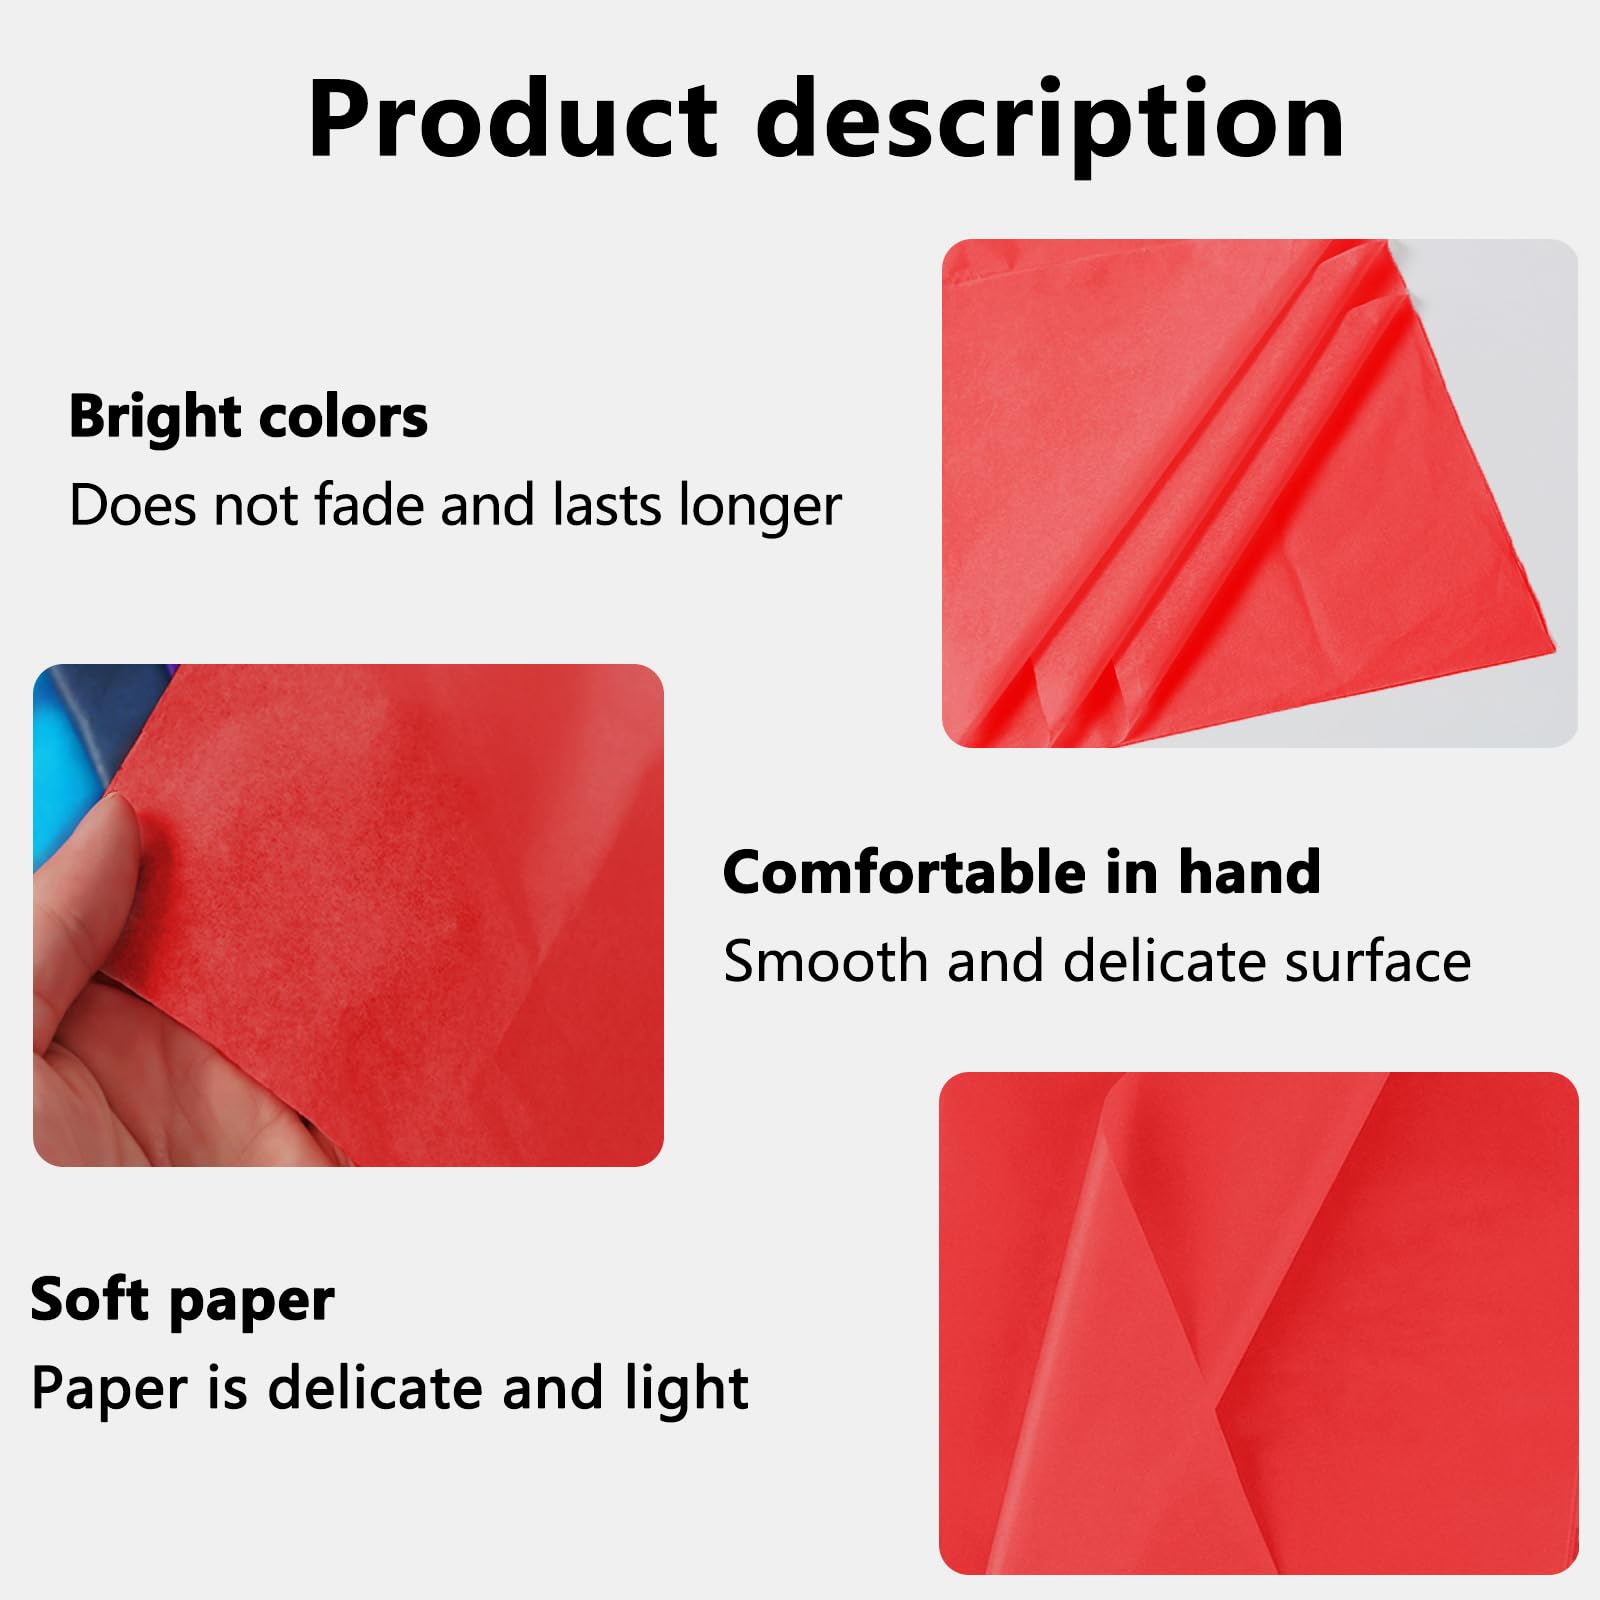 20 Sheets Tissue Paper - Red Tissue Paper for Gift Bags, Wrapping Tissue Paper Bulk 50x70CM Acid Free Tissue Paper Sheets for Packaging Birthday Wedding Holiday DIY Crafts Gift Box Wrapping